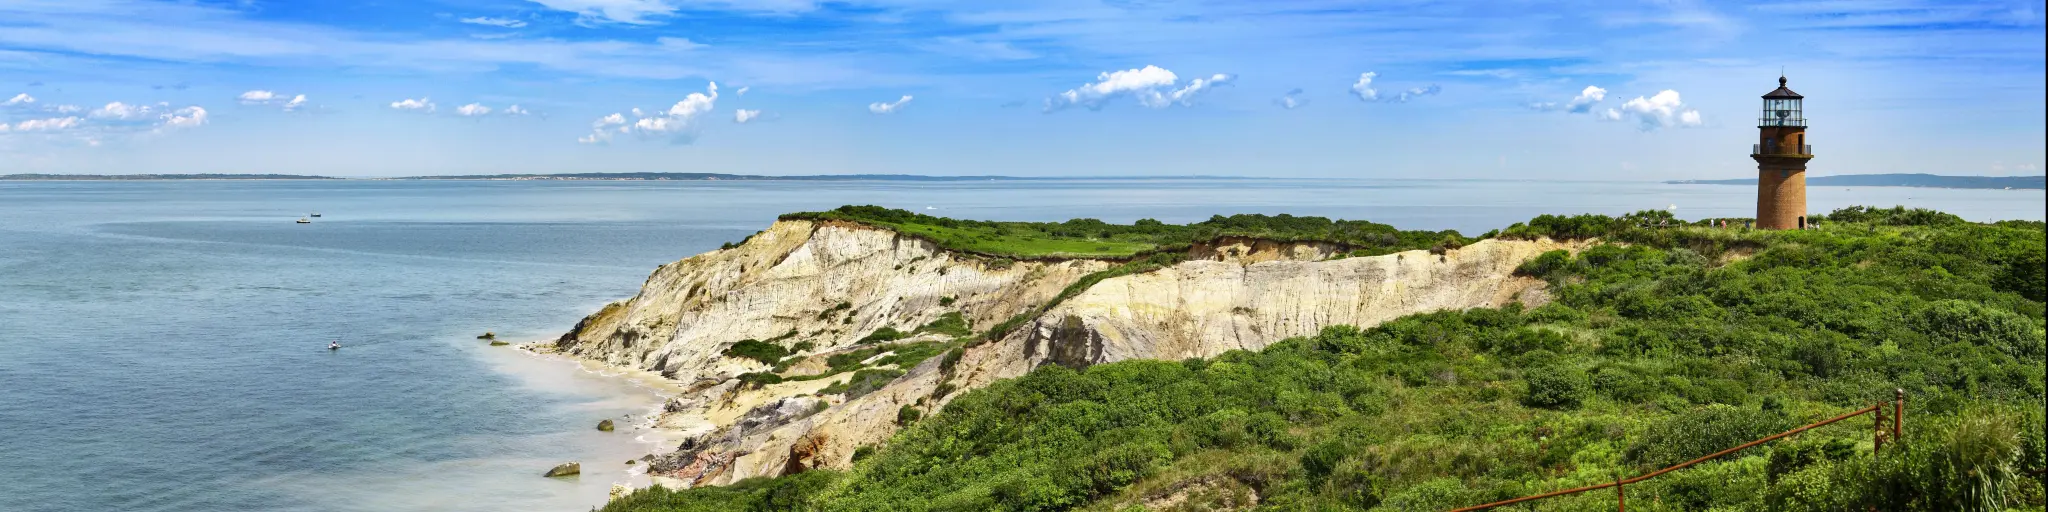 A panoramic view of the Coastal Lighthouse on a green grassy cliff with a mirroring sky and sea of blue with fluffy cotton-like clouds in Aquinnah, Martha's Vineyard